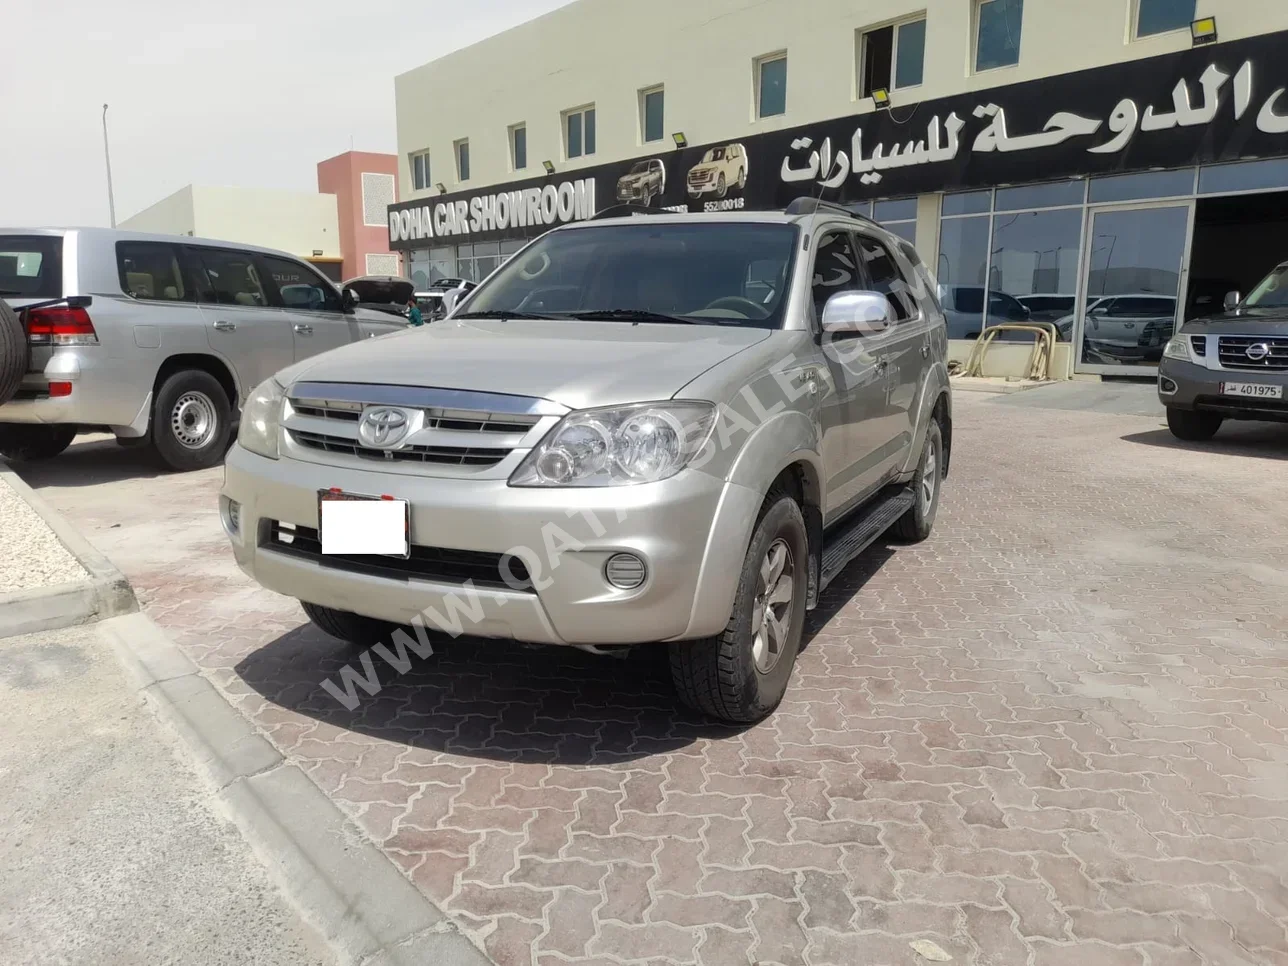 Toyota  Fortuner  2006  Automatic  49,000 Km  6 Cylinder  Four Wheel Drive (4WD)  SUV  Silver